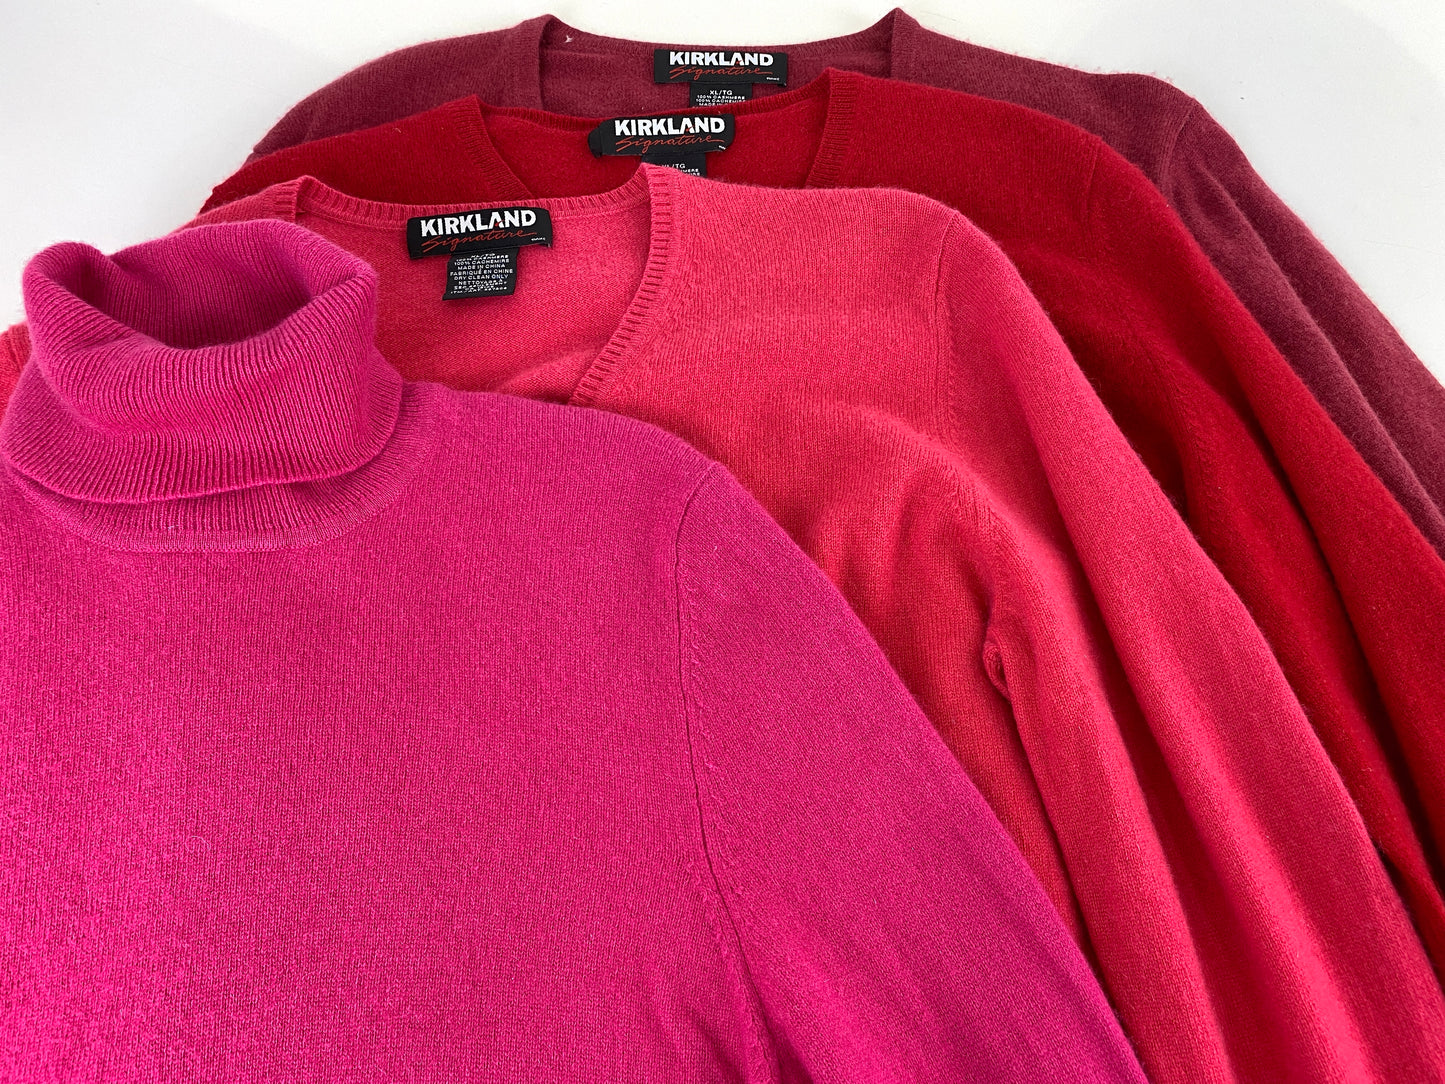 4 vintage cashmere sweaters in pink and red, laying flat. Ian Drummond Vintage.